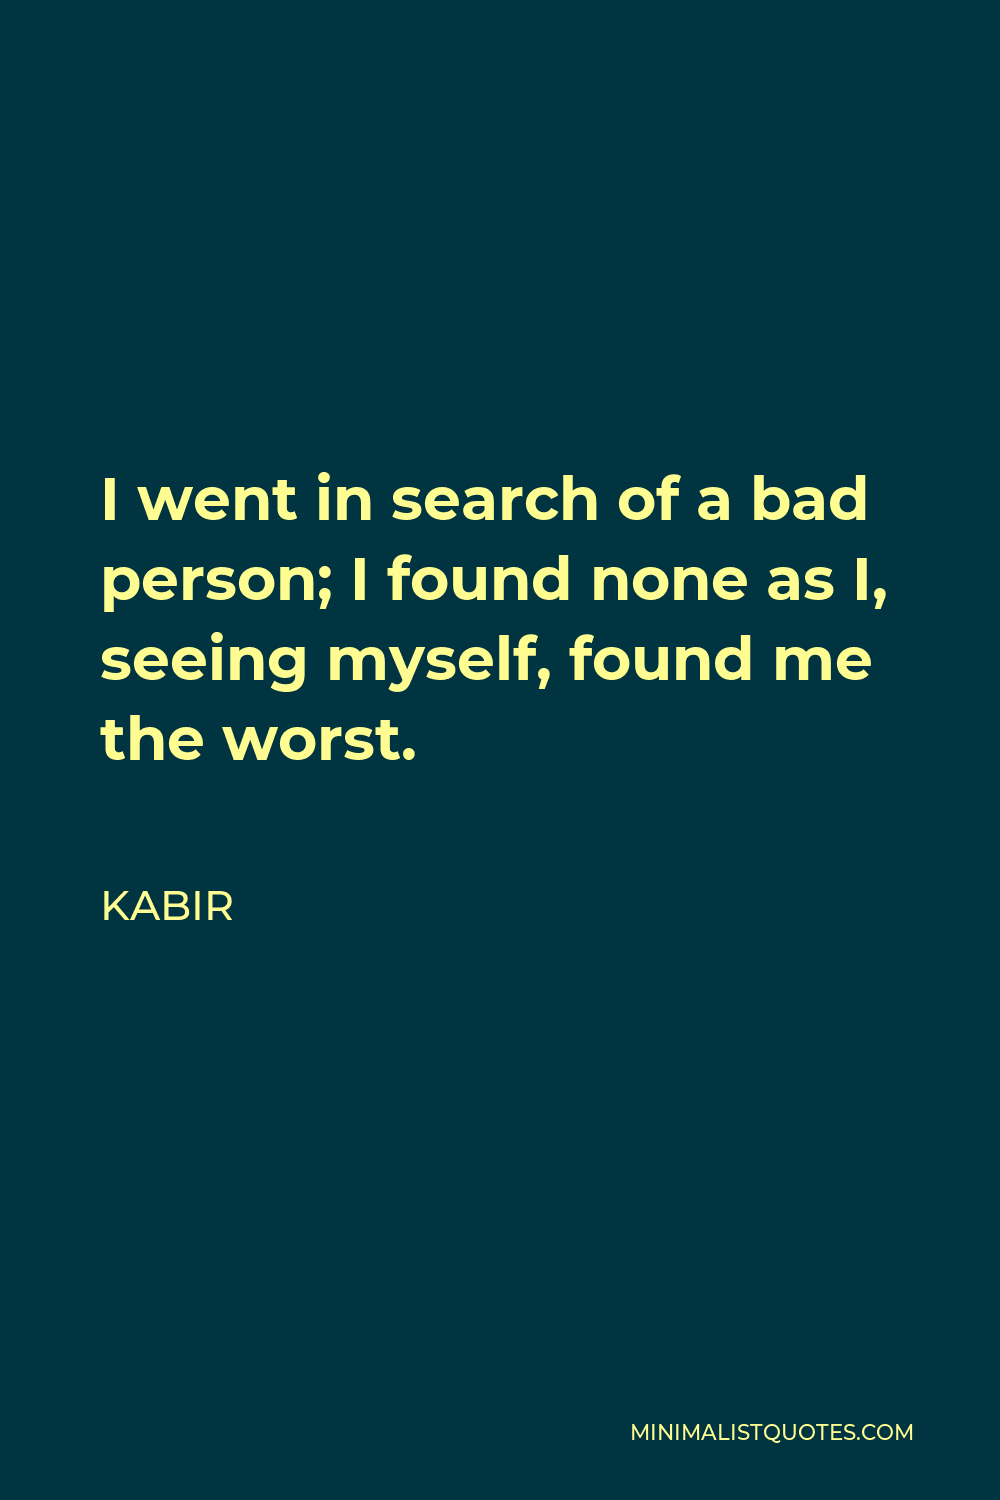 Kabir Quote - I went in search of a bad person; I found none as I, seeing myself, found me the worst.